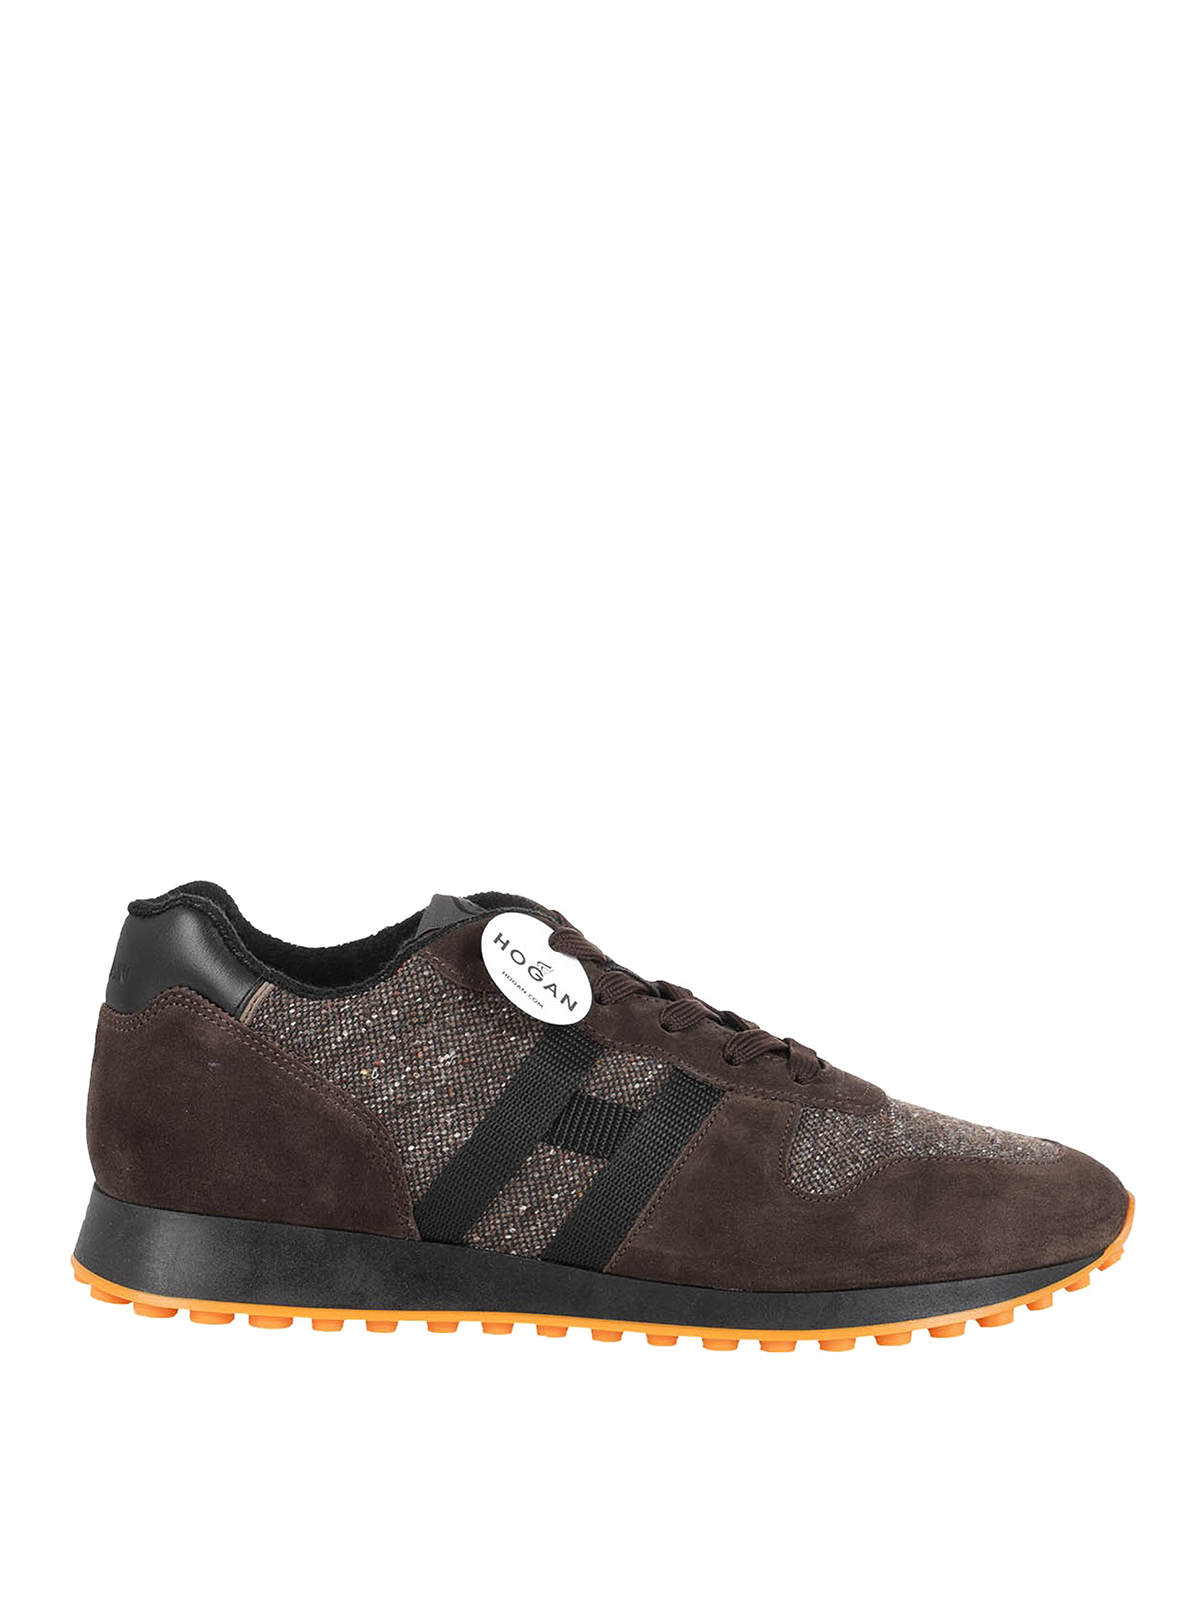 Trainers Hogan - H429 sneakers - HXM4290AN51OCK0LCE | Shop online at iKRIX